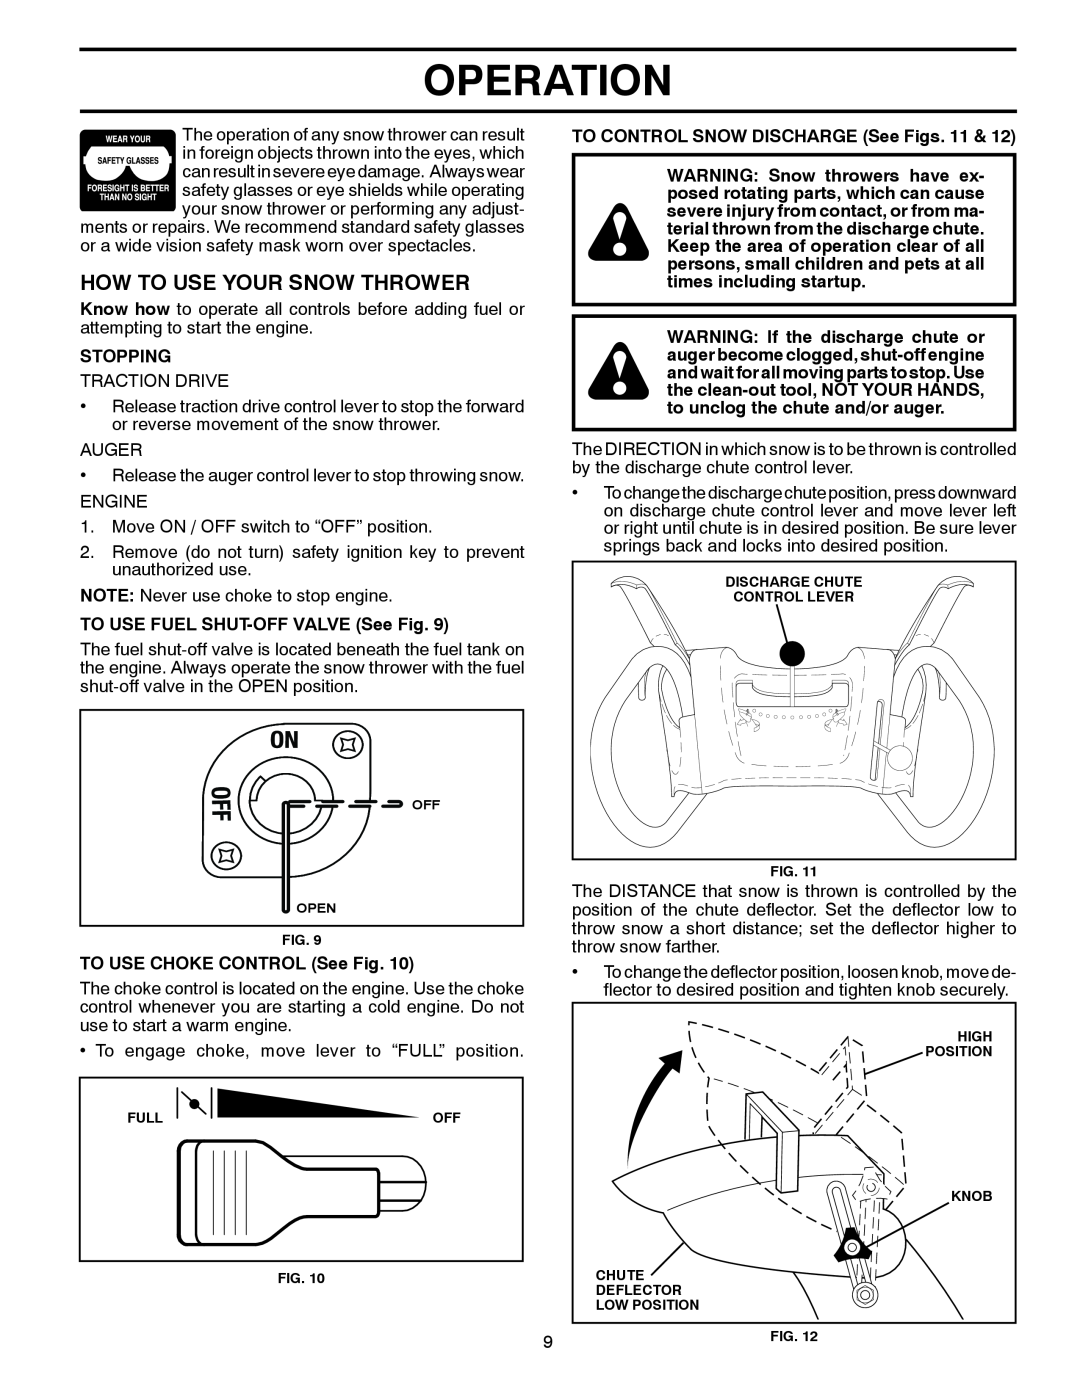 Poulan 96198002601, 428701 How To Use Your Snow Thrower, Operation, Stopping, TO USE FUEL SHUT-OFF VALVE See Fig 